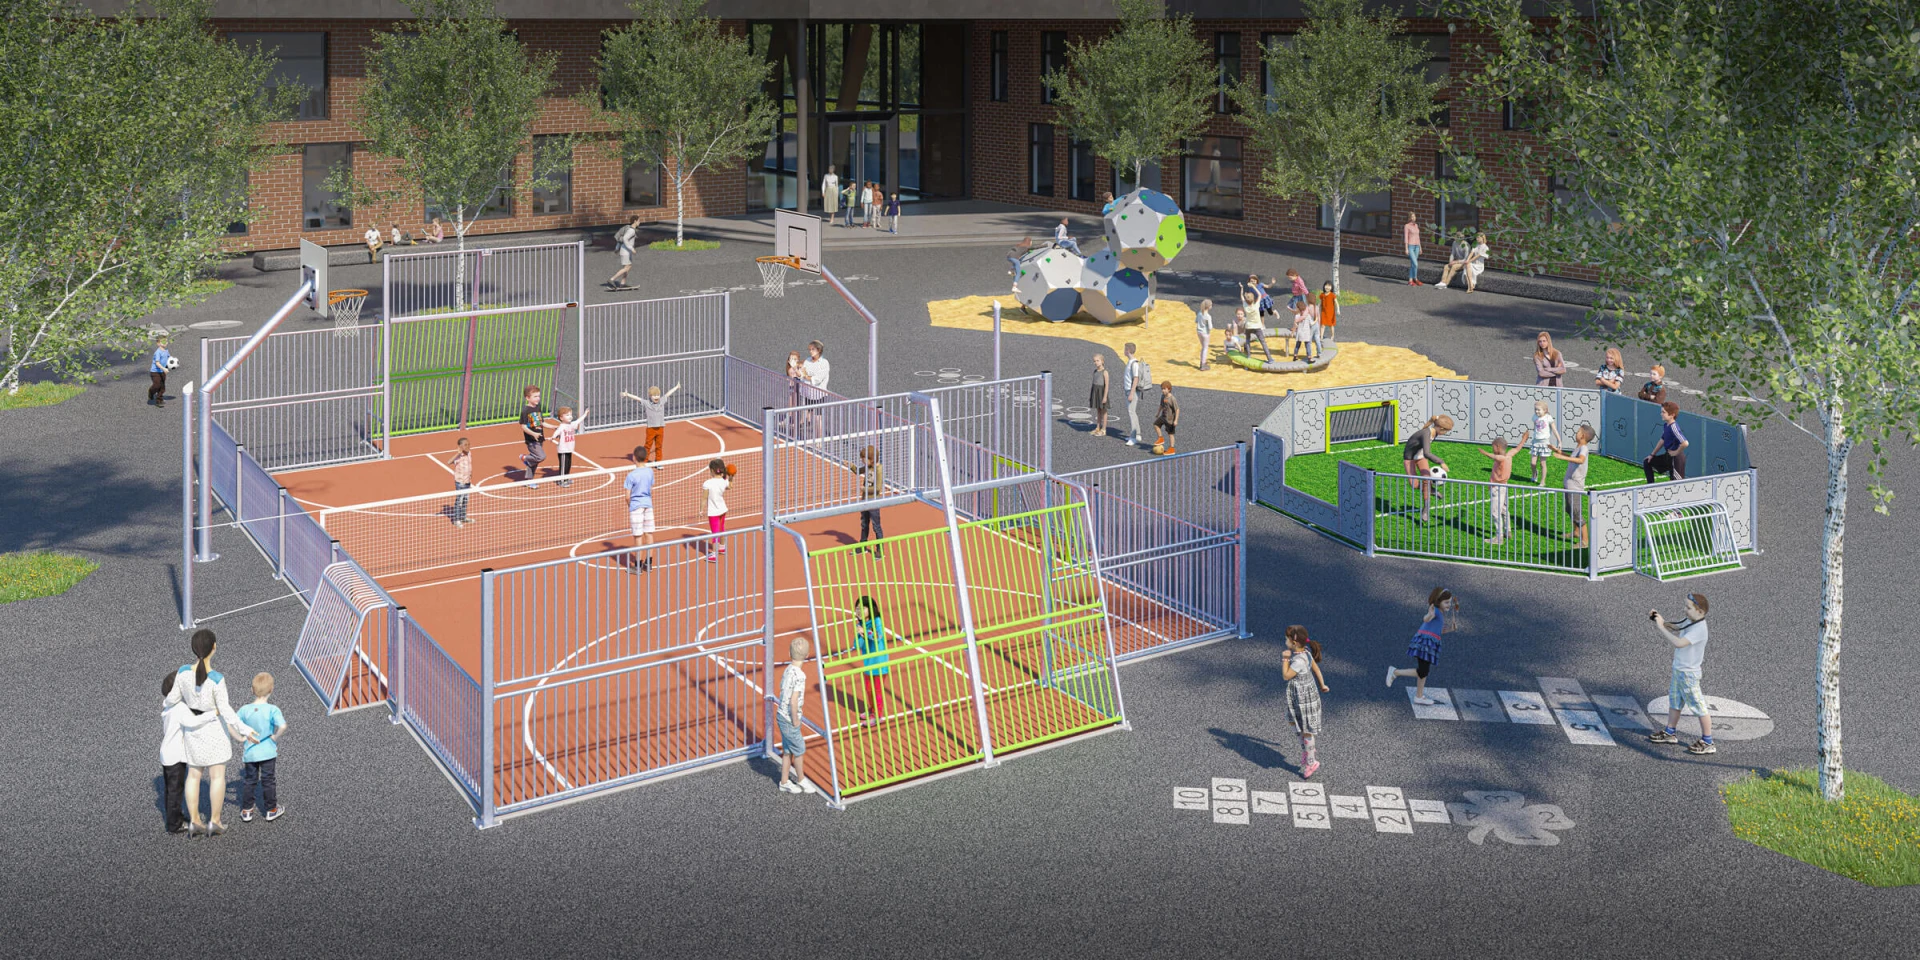 Concept design for a sports area within a schoolyard